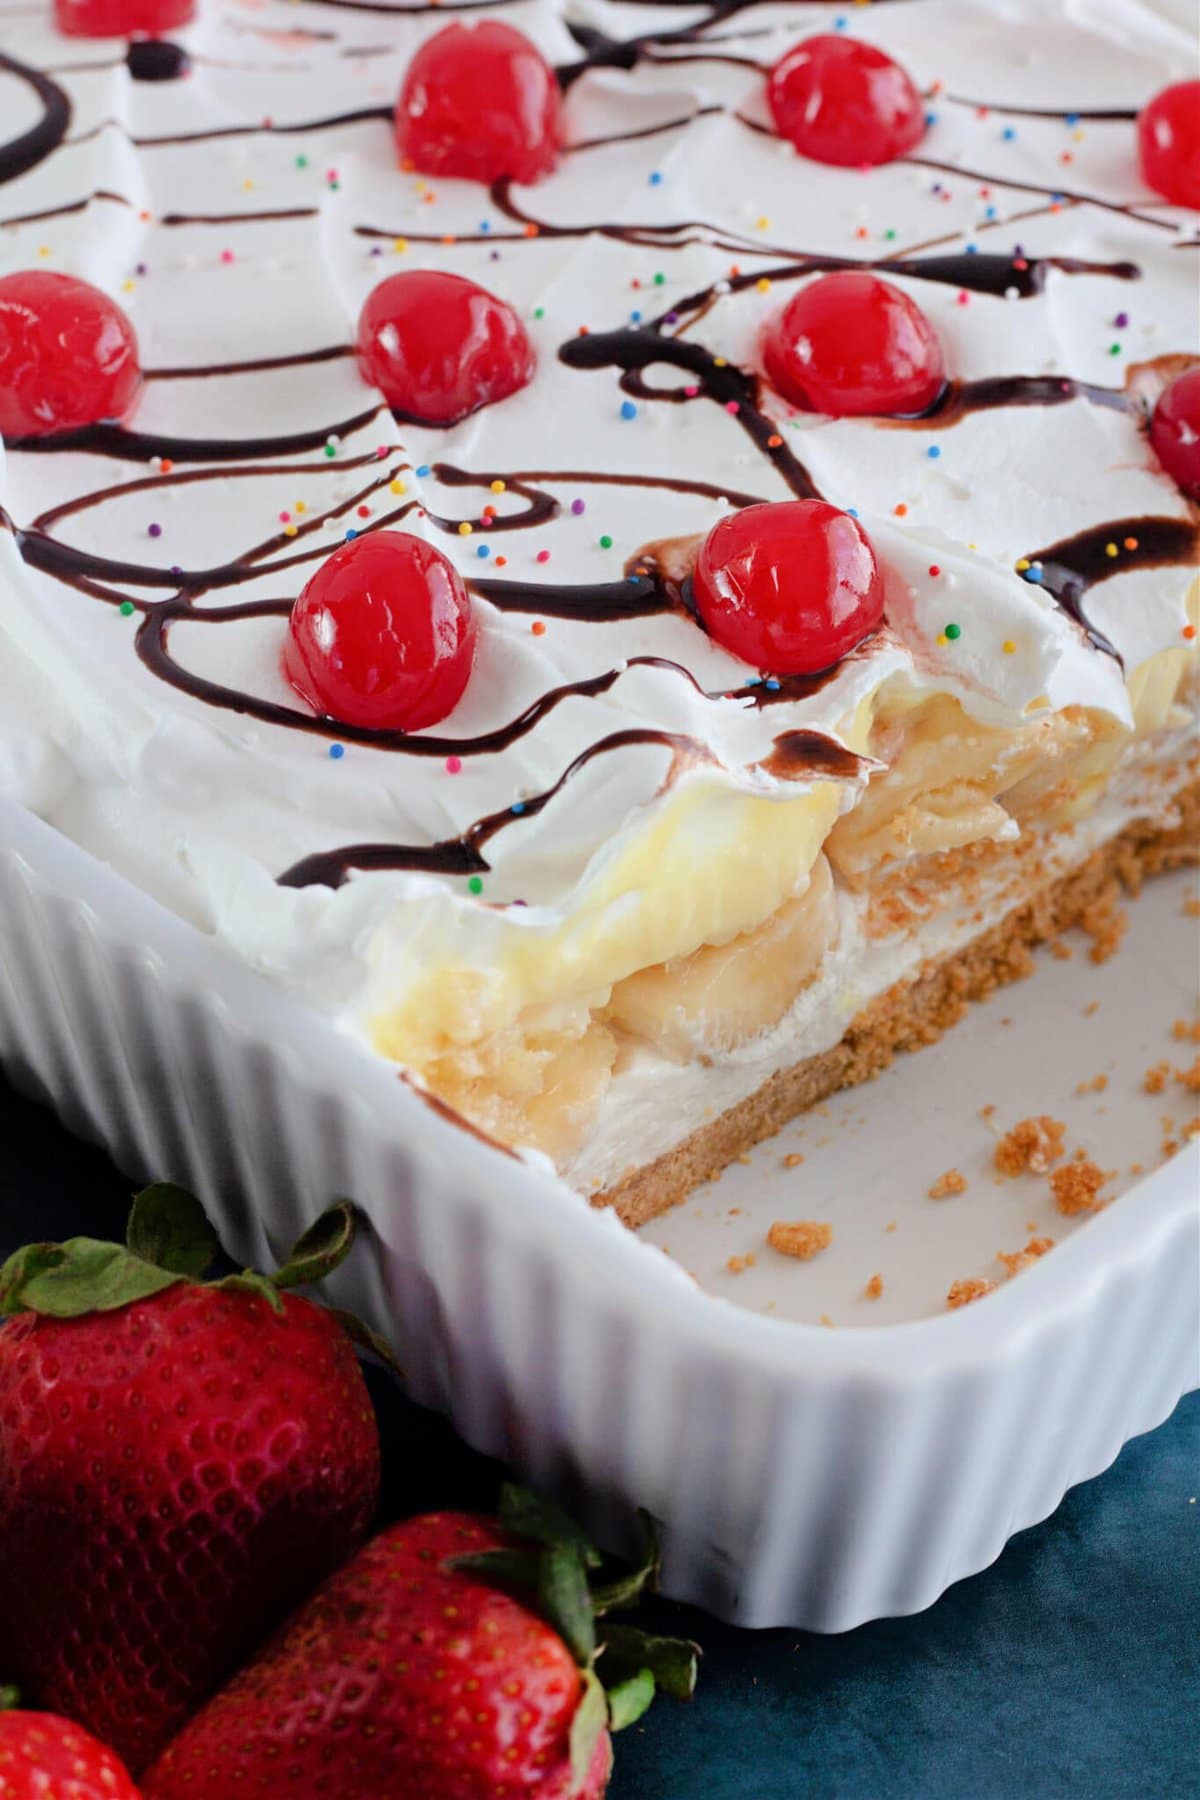 Banana Split Cake in a pan with the layers visible.